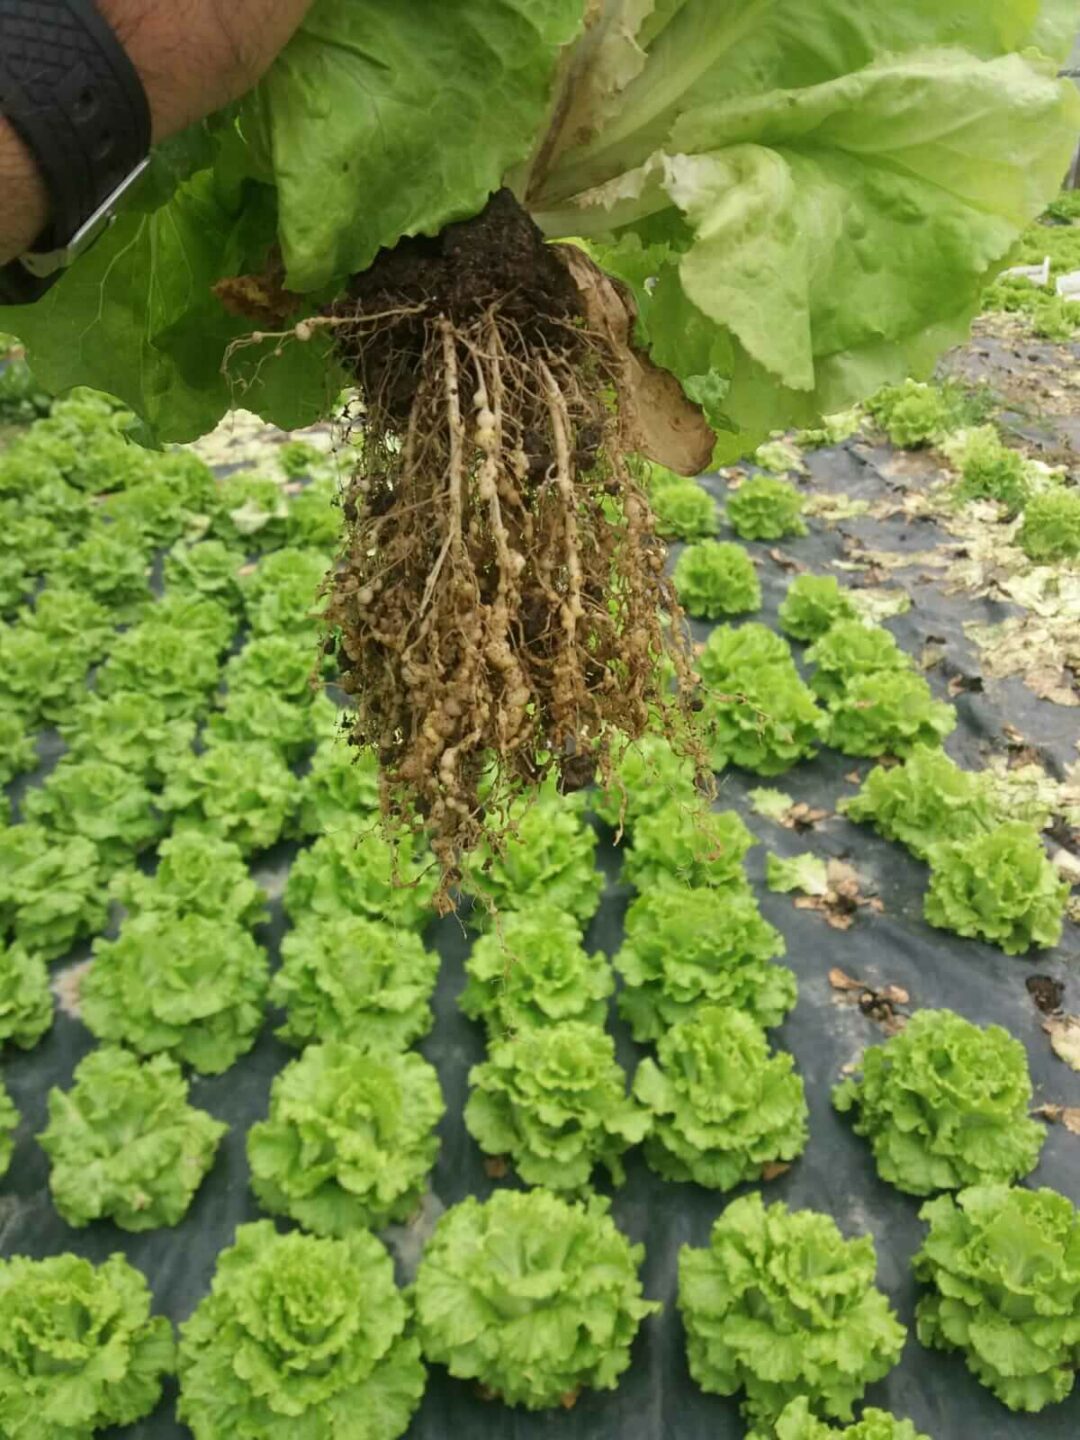 Lettuce roots. There are big welts on the roots. Behind the roots are more lettuces